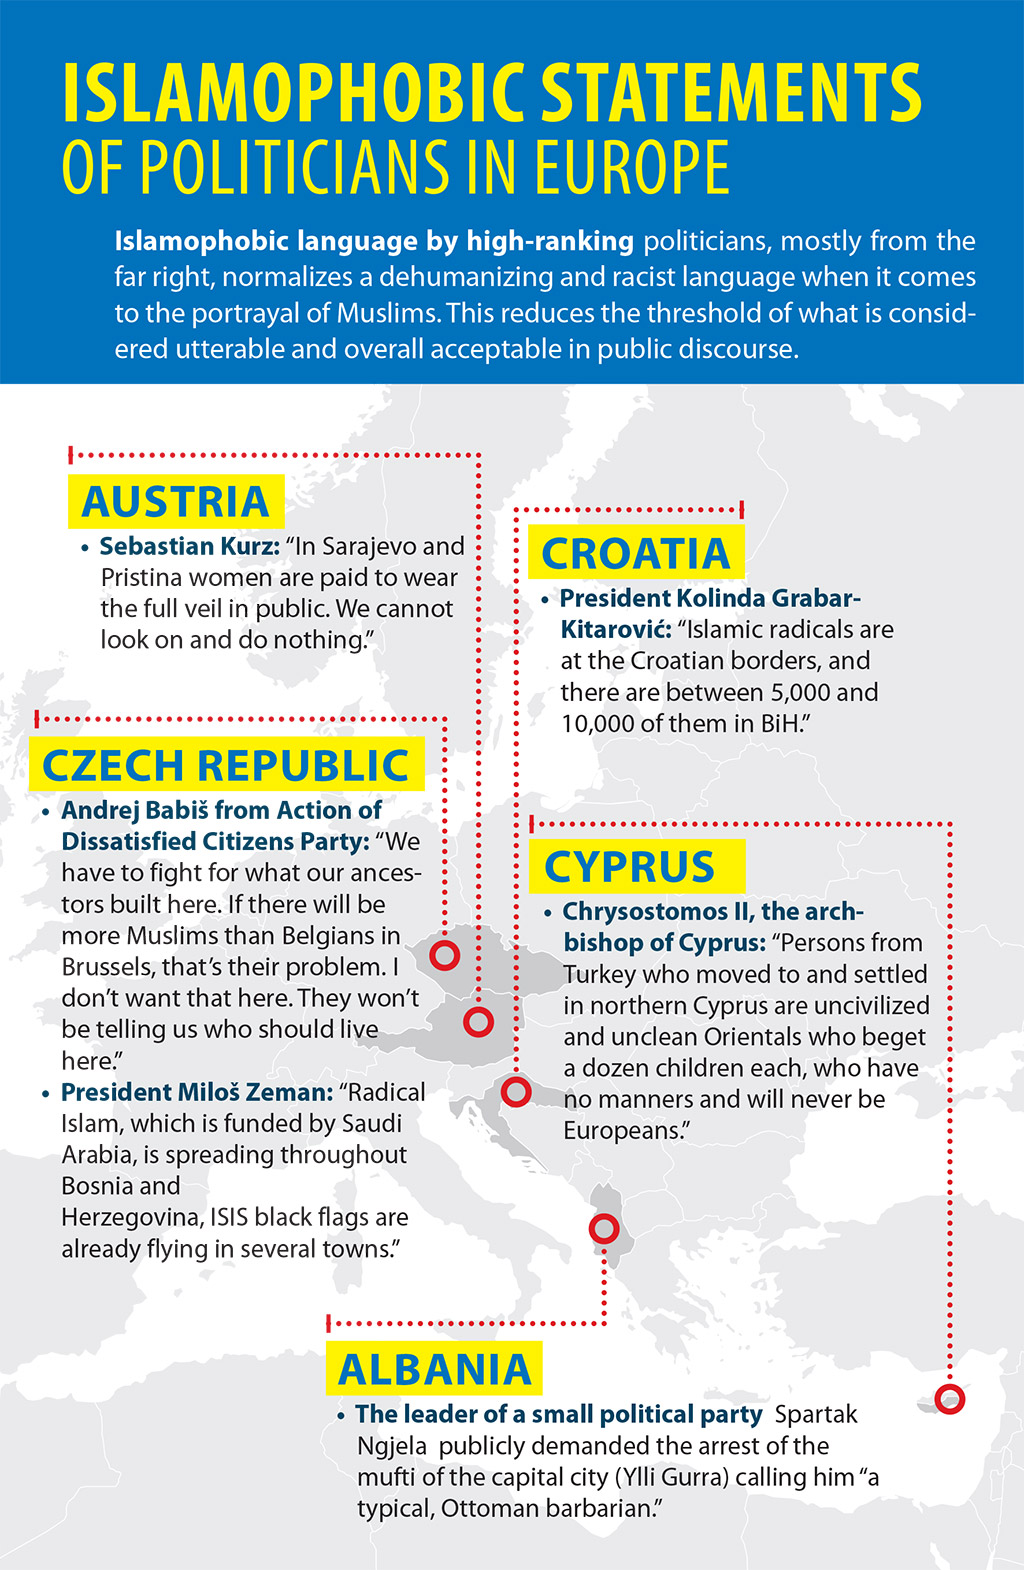 Islamophobic statements of politicians in Europe